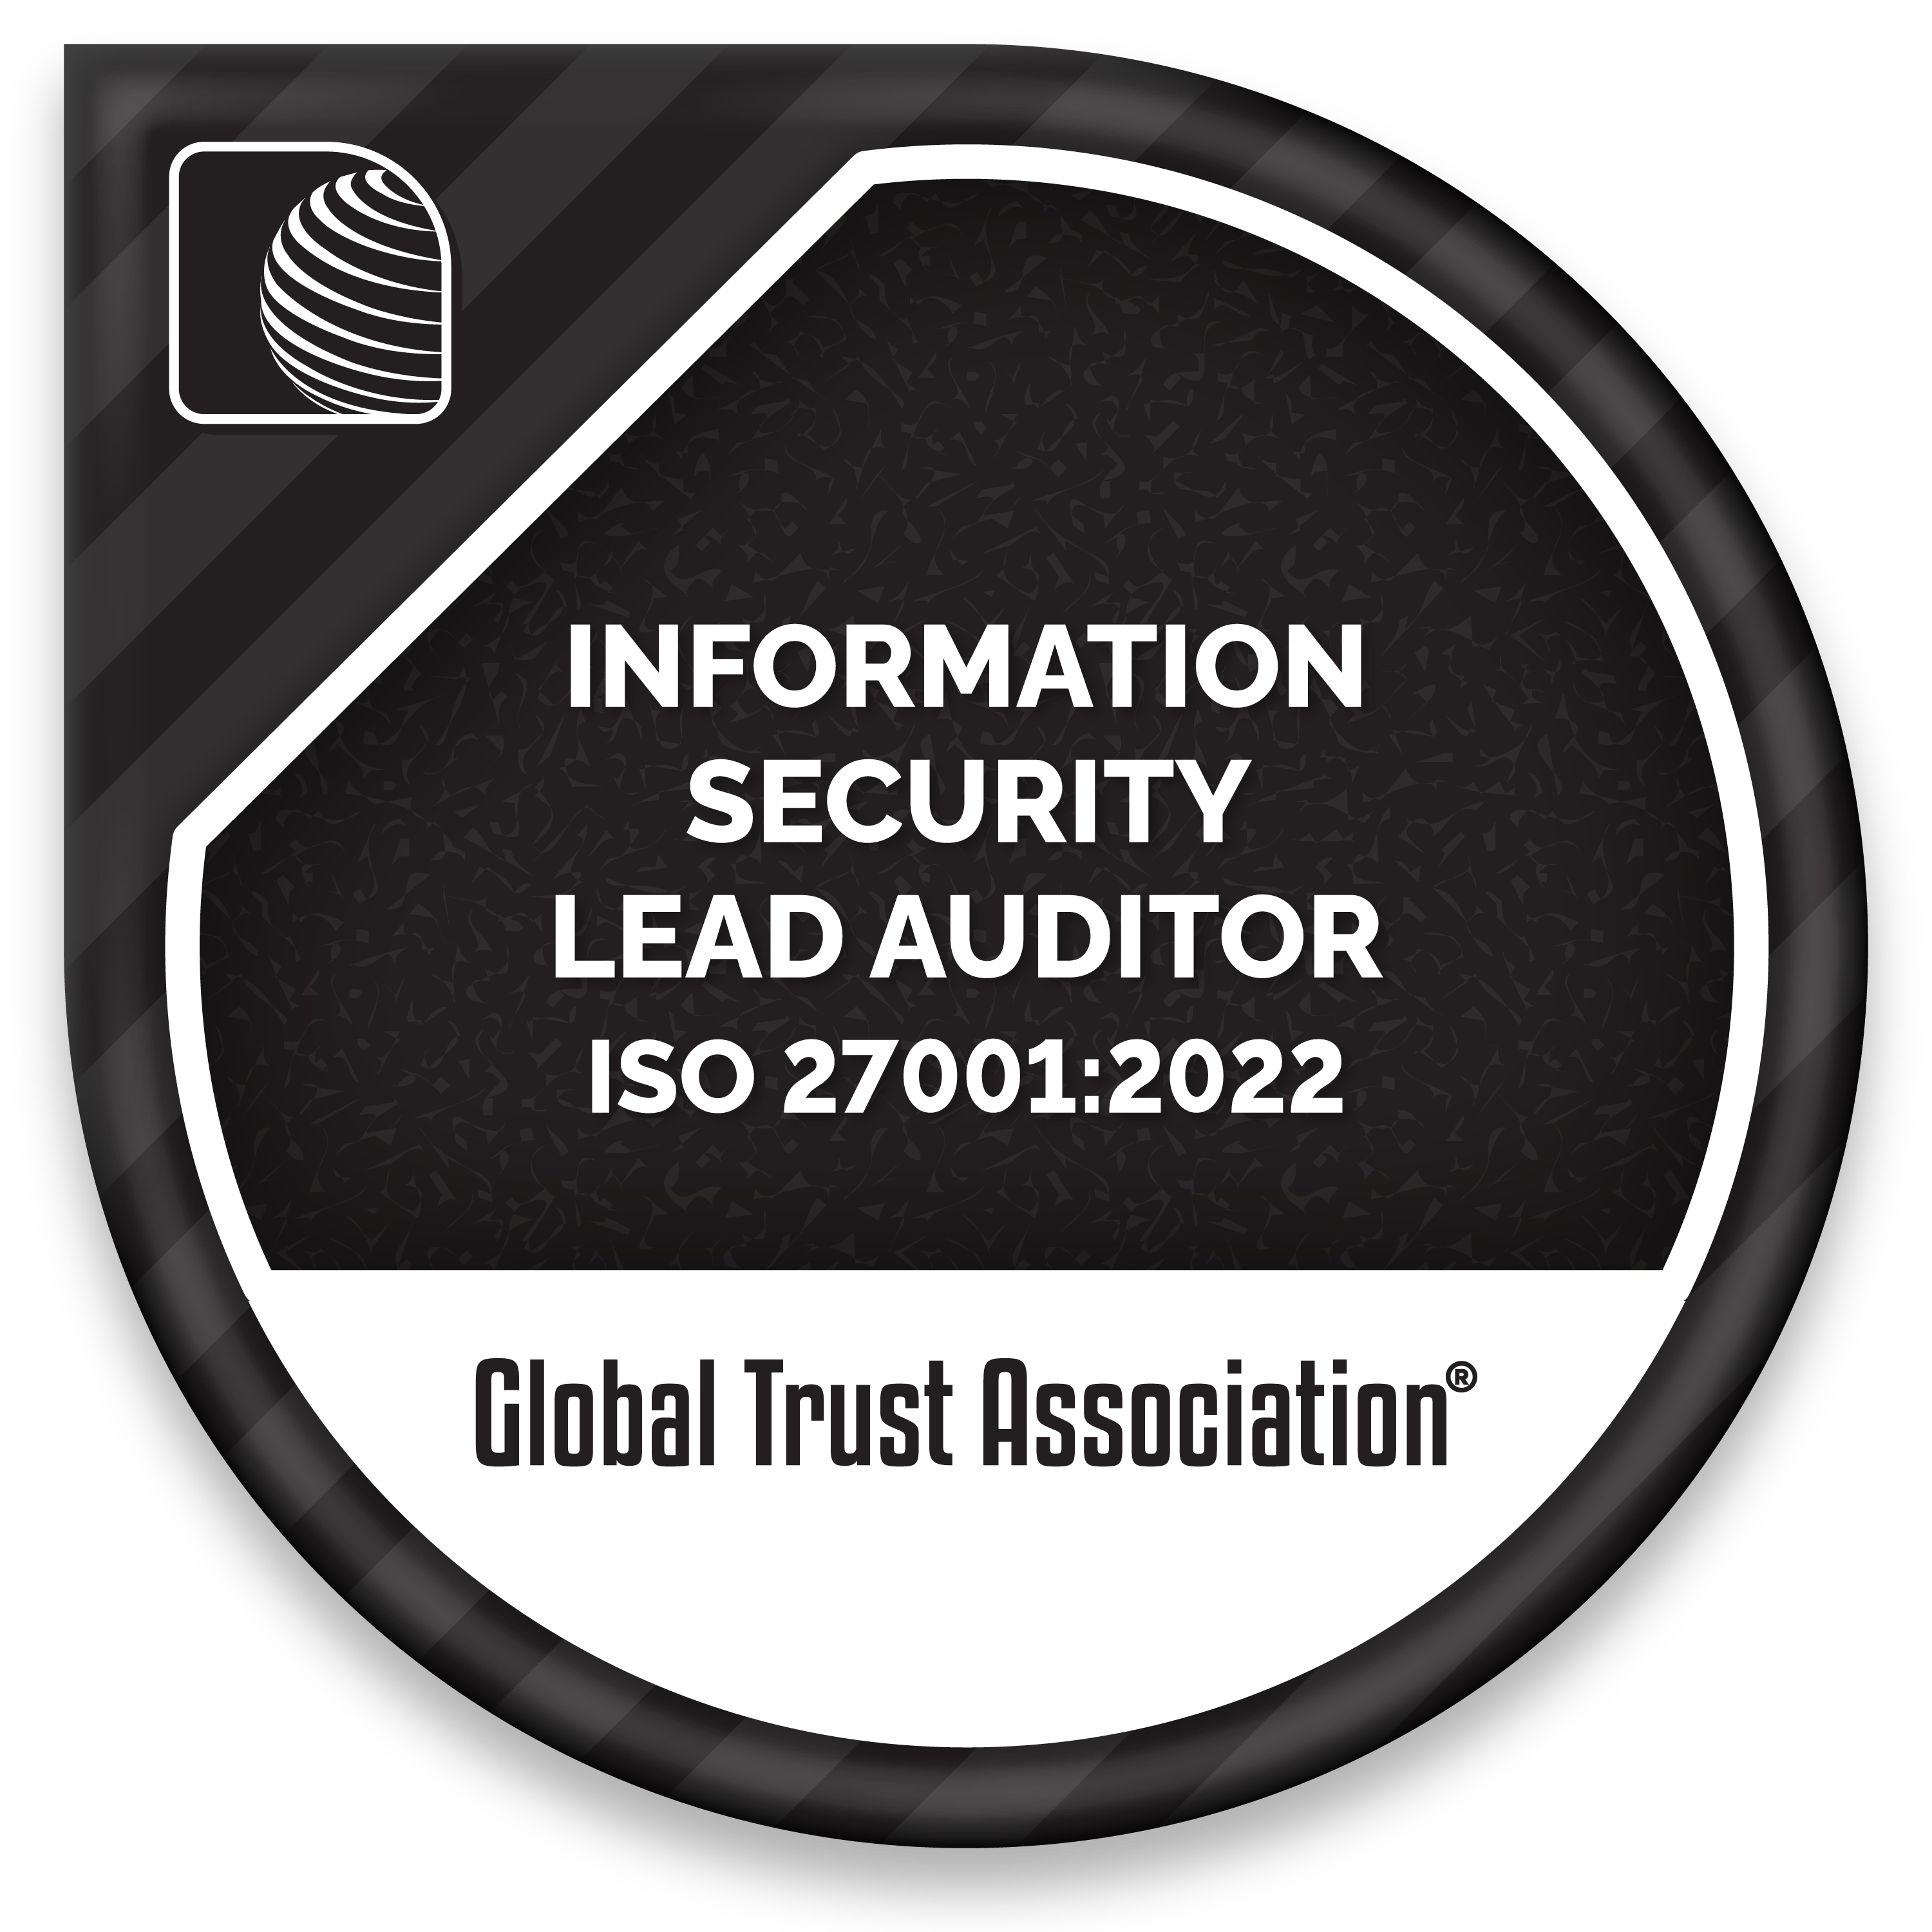 Certified Information Security Lead Auditor (ISO 27001:2022)